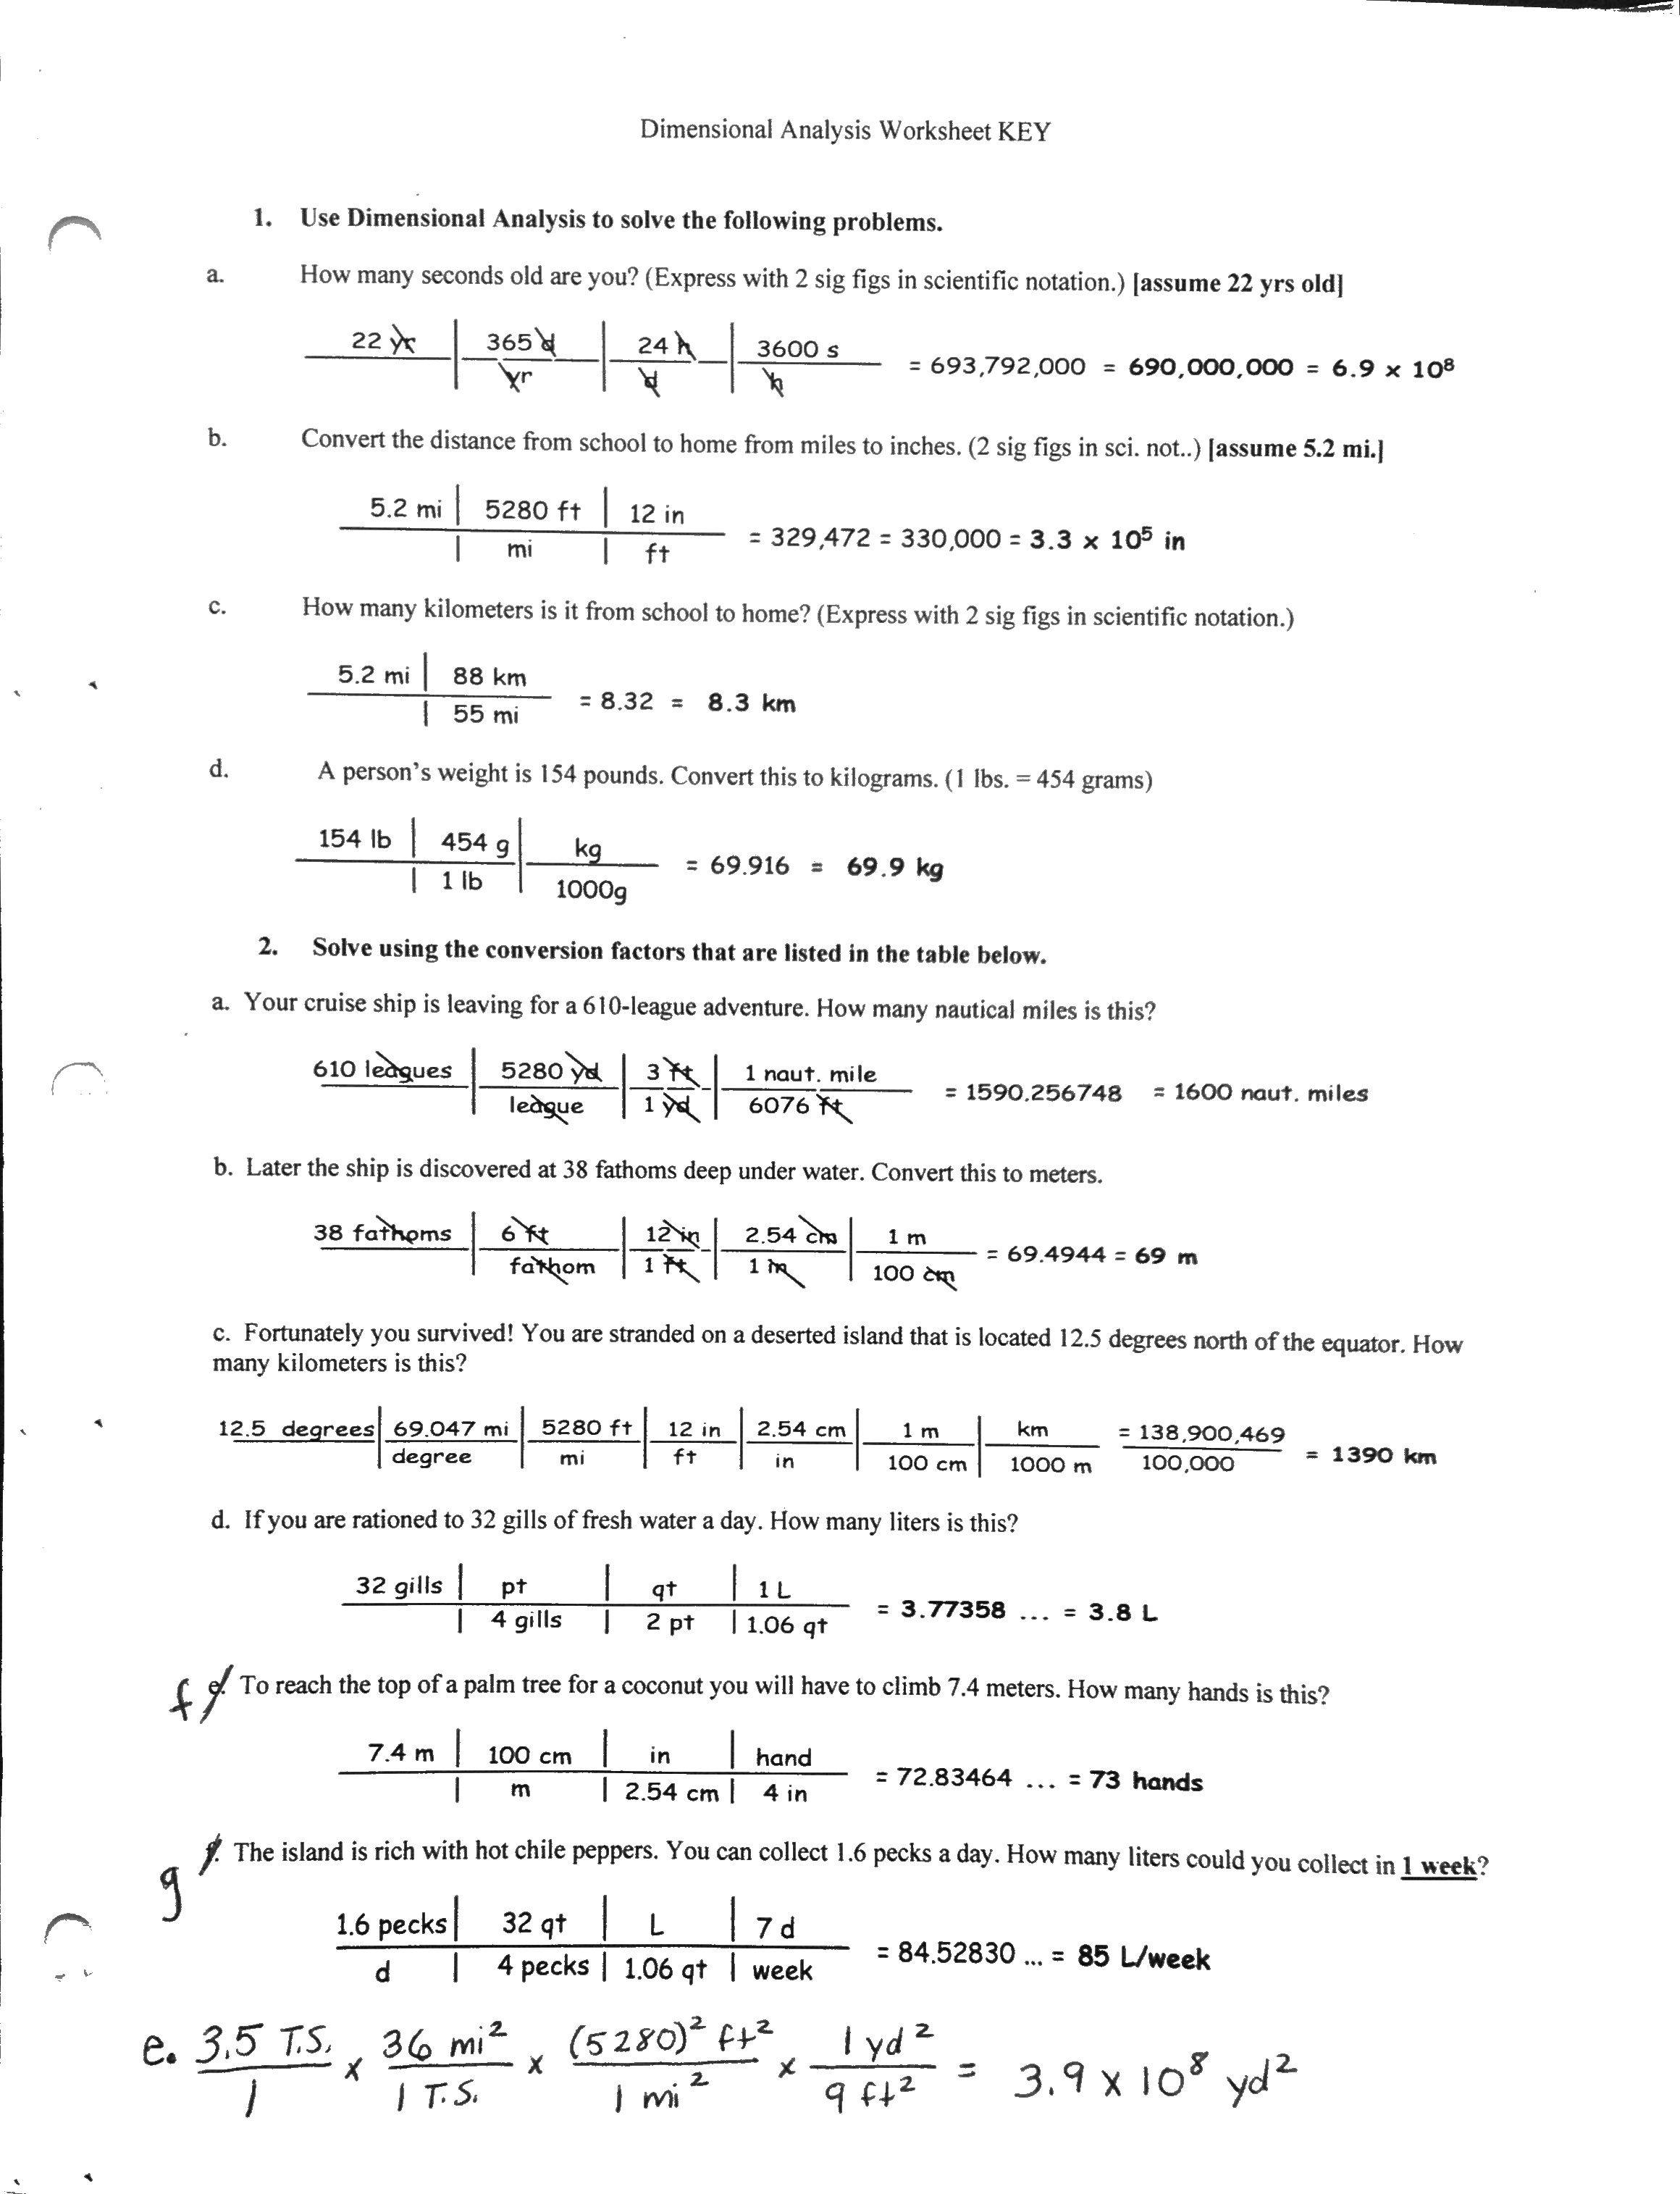 Dimensional Analysis Worksheet With Answer Key